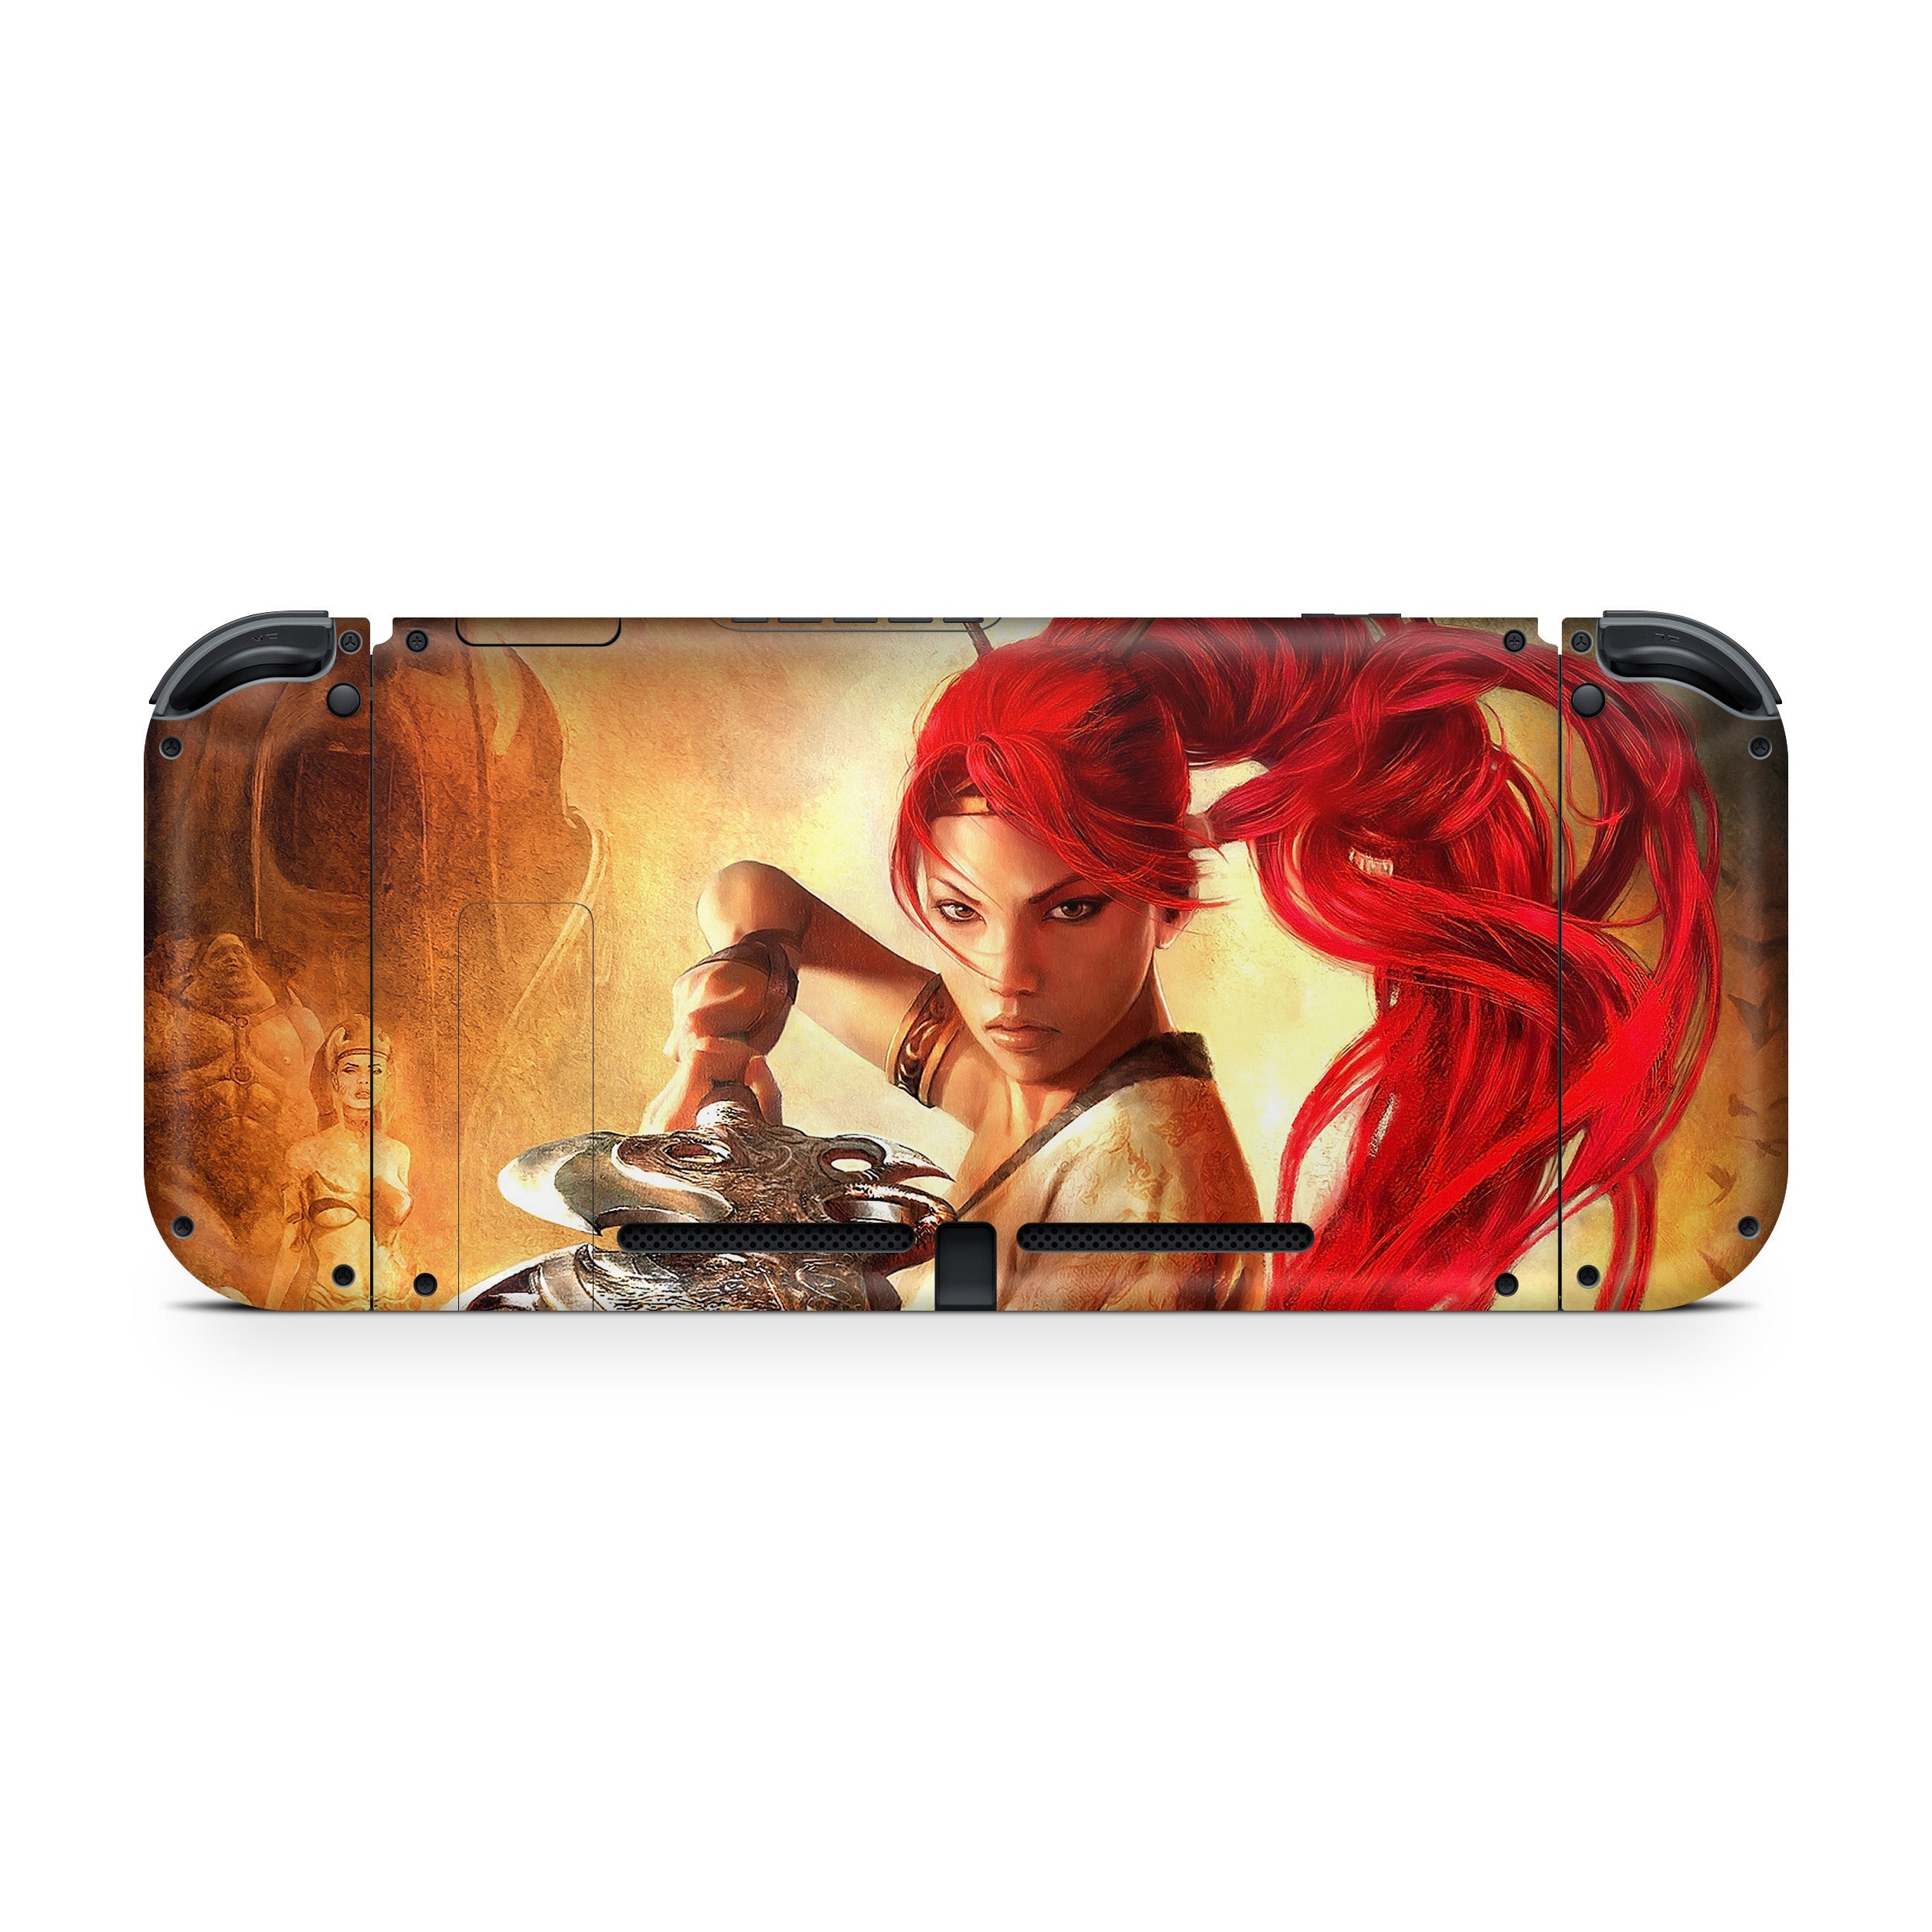 A video game skin featuring a Heavenly Sword design for the Nintendo Switch.